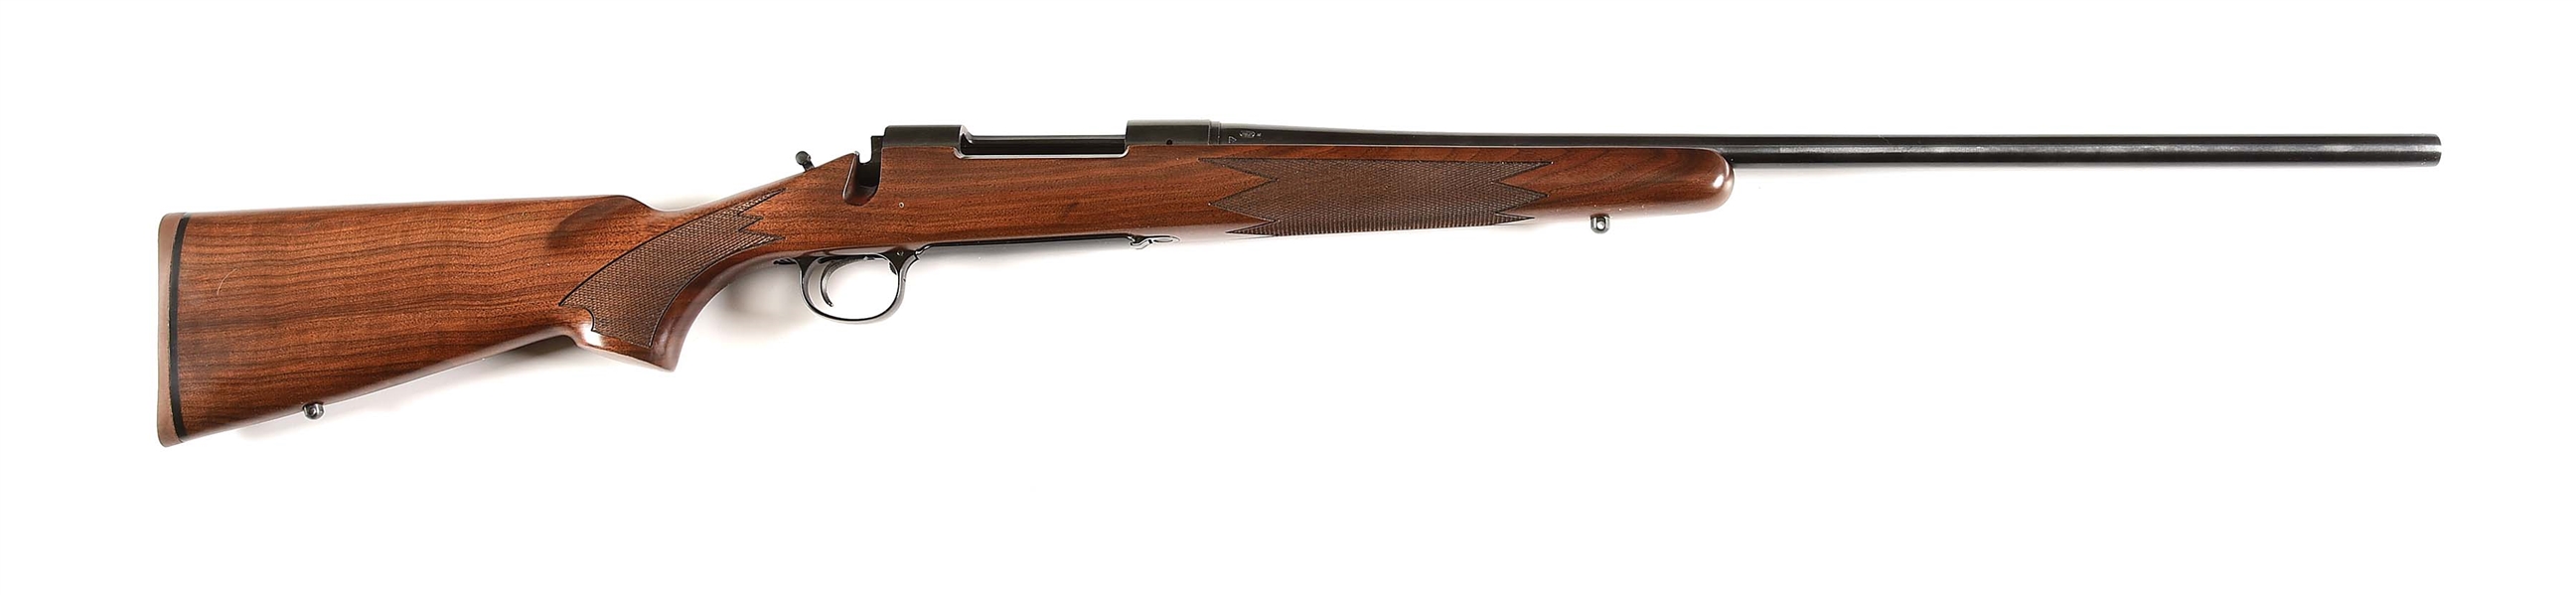 (M) REMINGTON MODEL 700 CLASSIC BOLT ACTION RIFLE IN 8MM MAUSER.